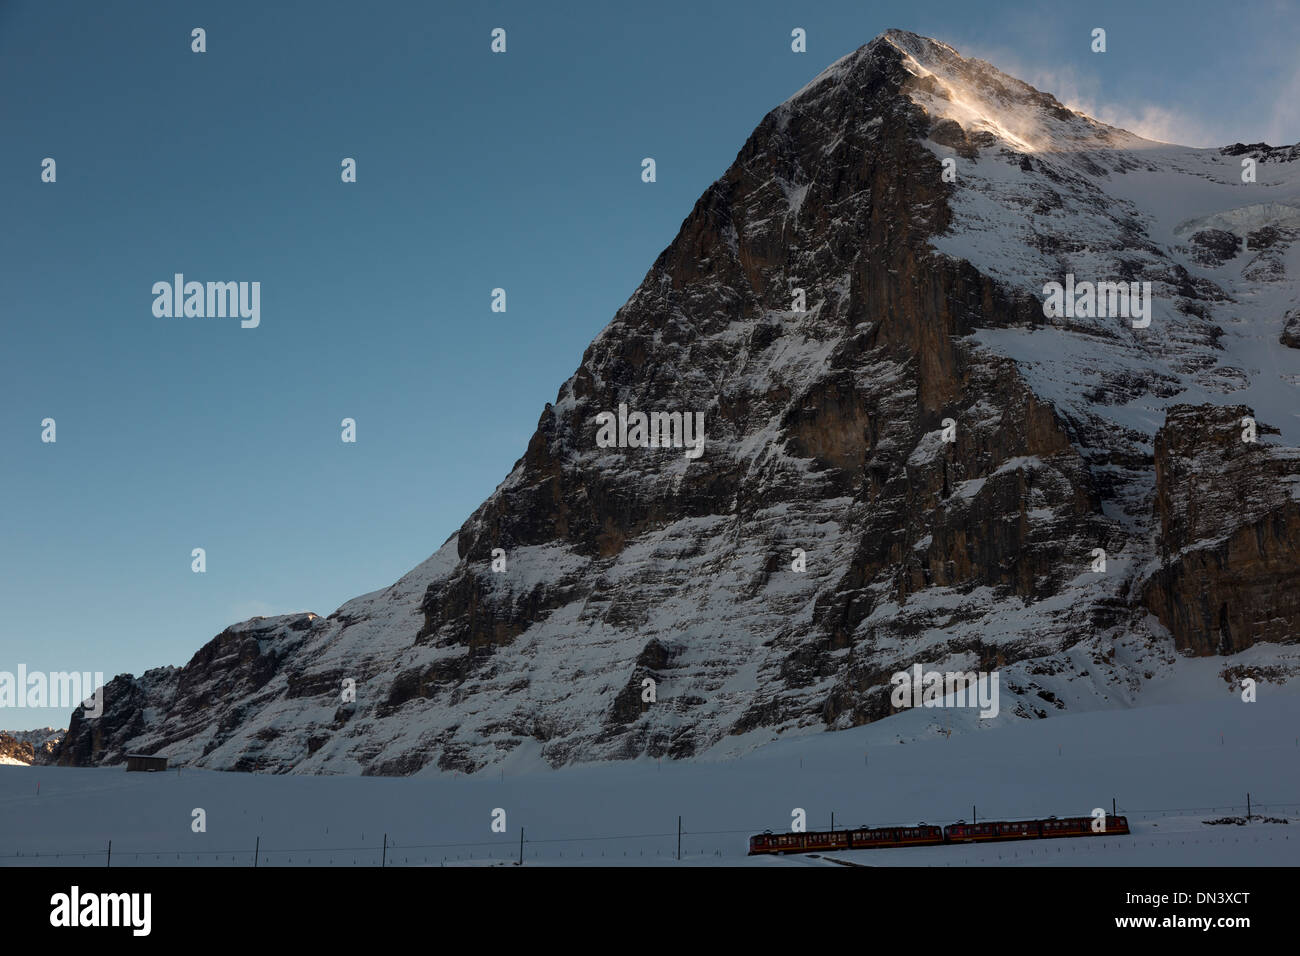 The north face of the Eiger mountain, Bernese Alps, Switzerland. Stock Photo